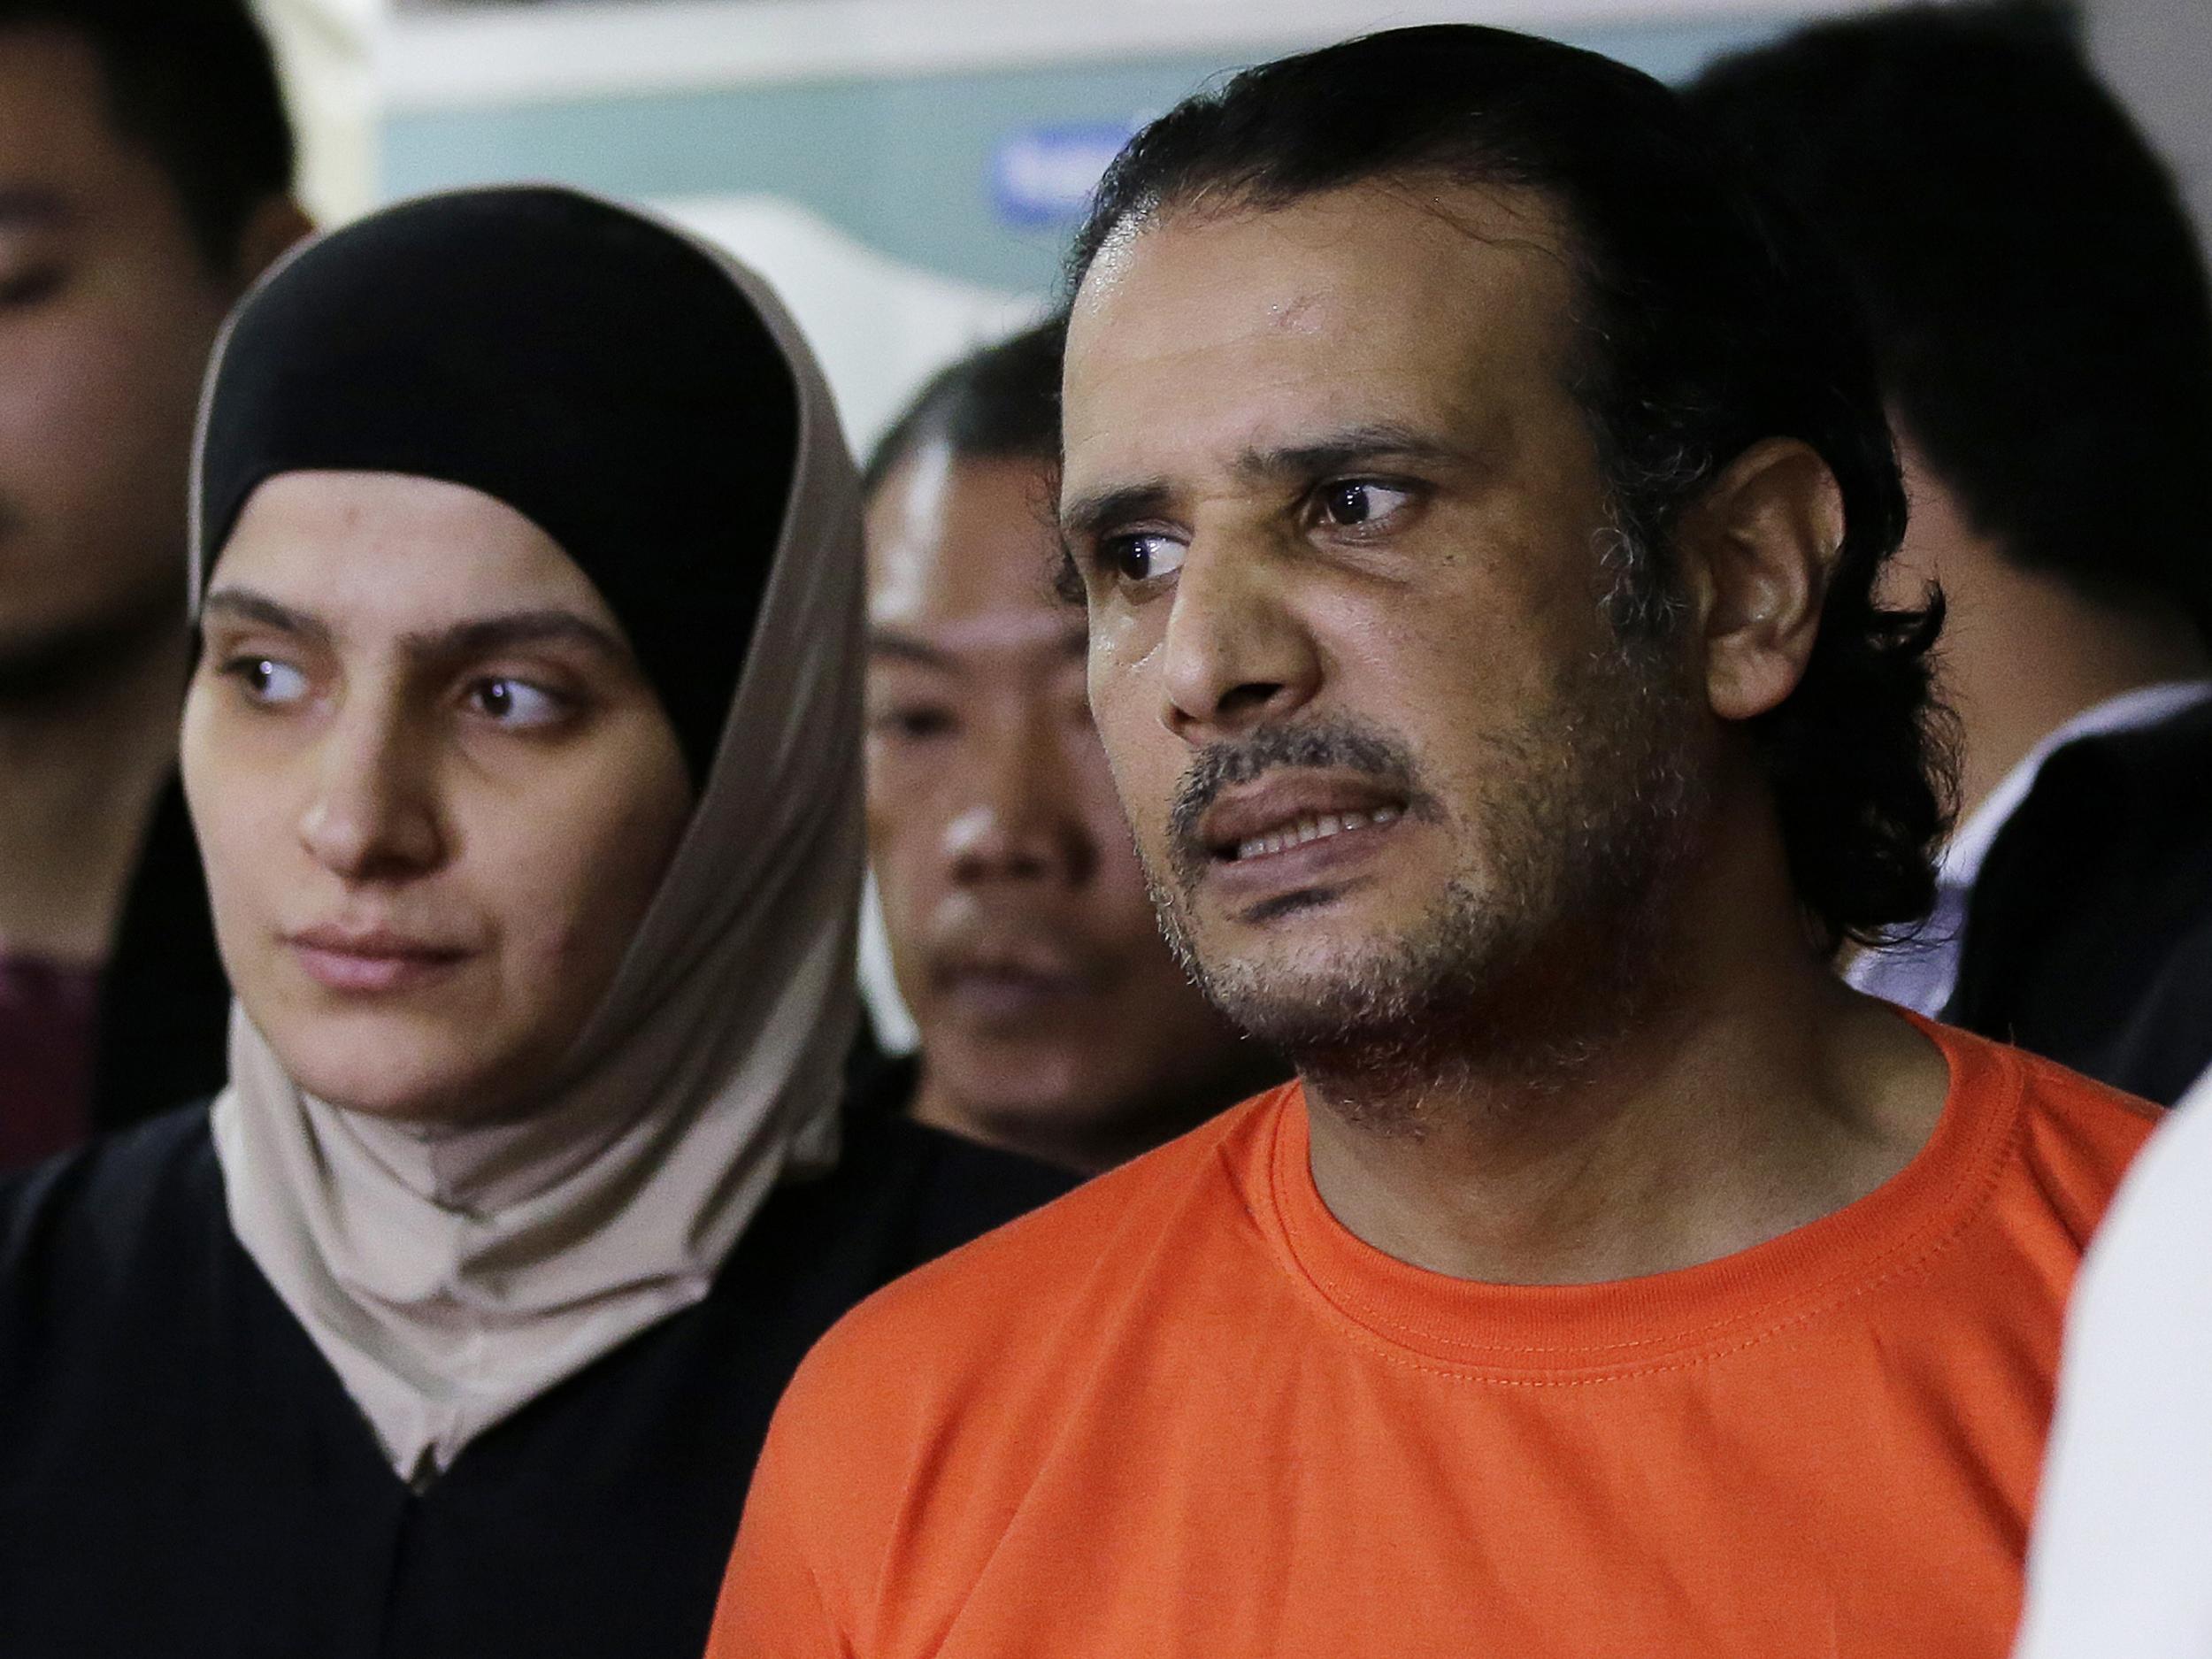 Suspected Isis members Rahaf Zina Dhafiri and Hussein Aldhafiri are presented to reporters at the National Bureau of Investigation in Manila